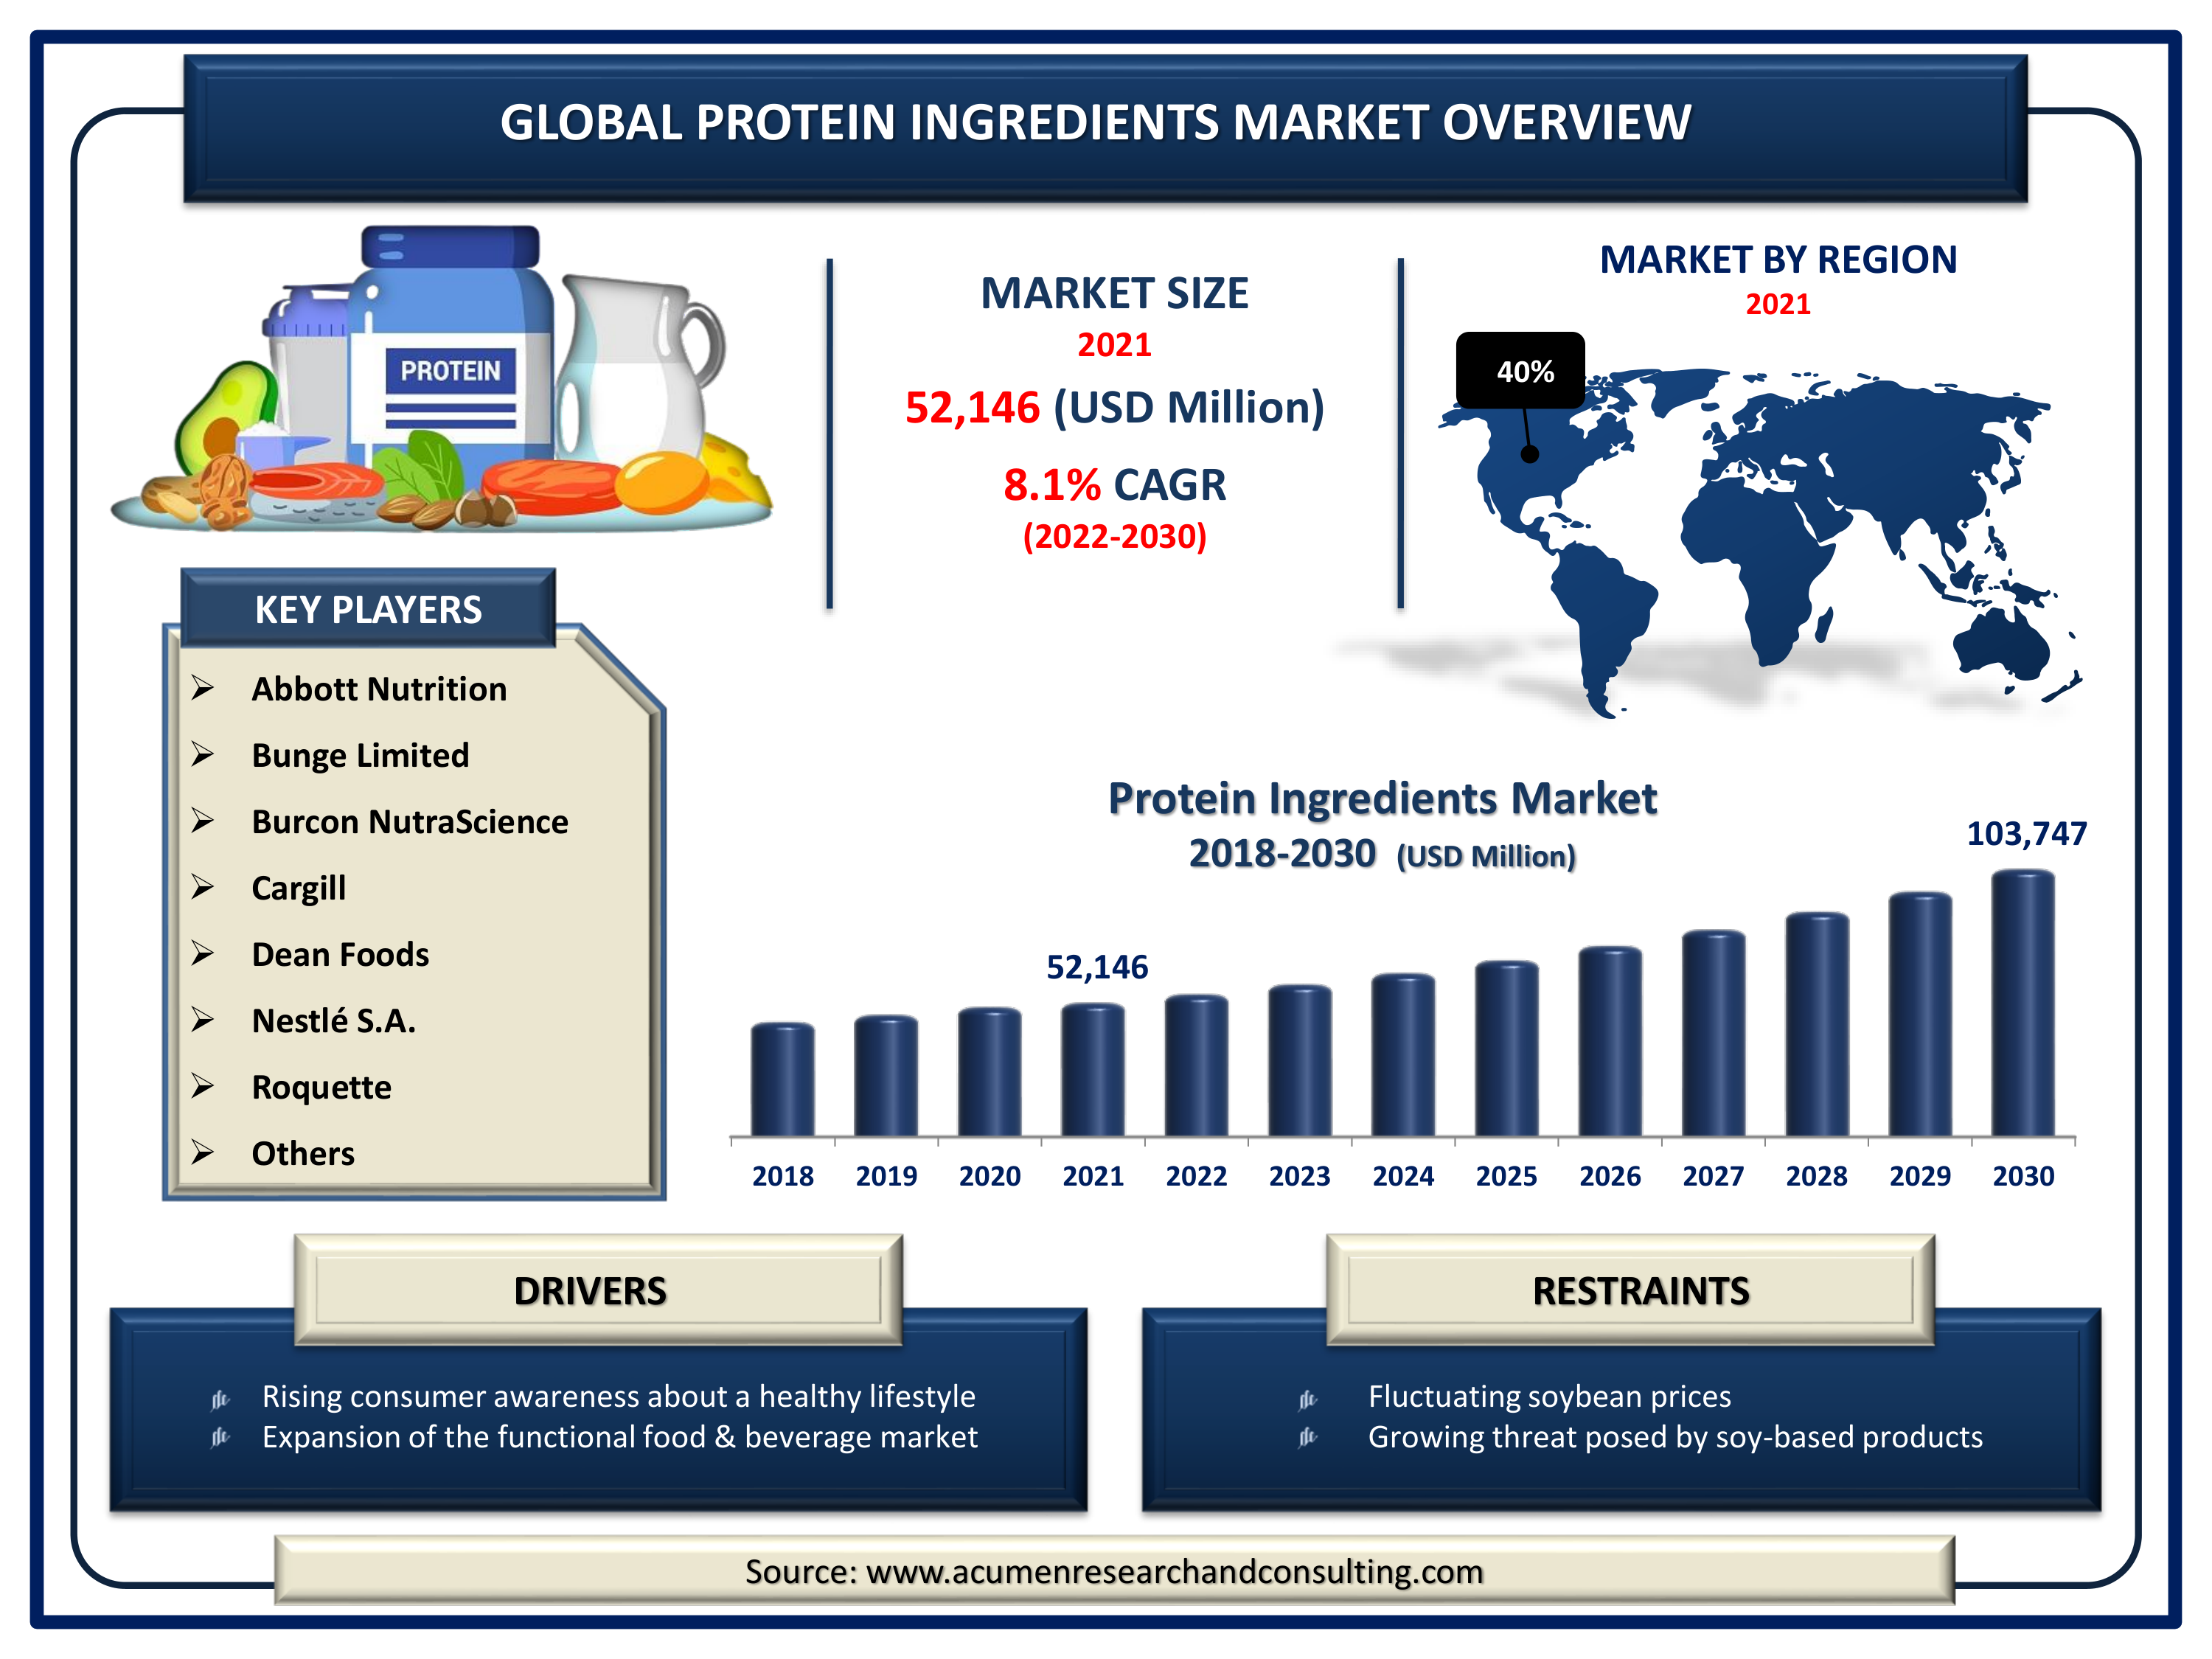 The Global Protein Ingredients Market Size was valued at USD 52,146 Million in 2021 and is predicted to be worth USD 103,747 Million by 2030, with a CAGR of 8.1% from 2022 to 2030.